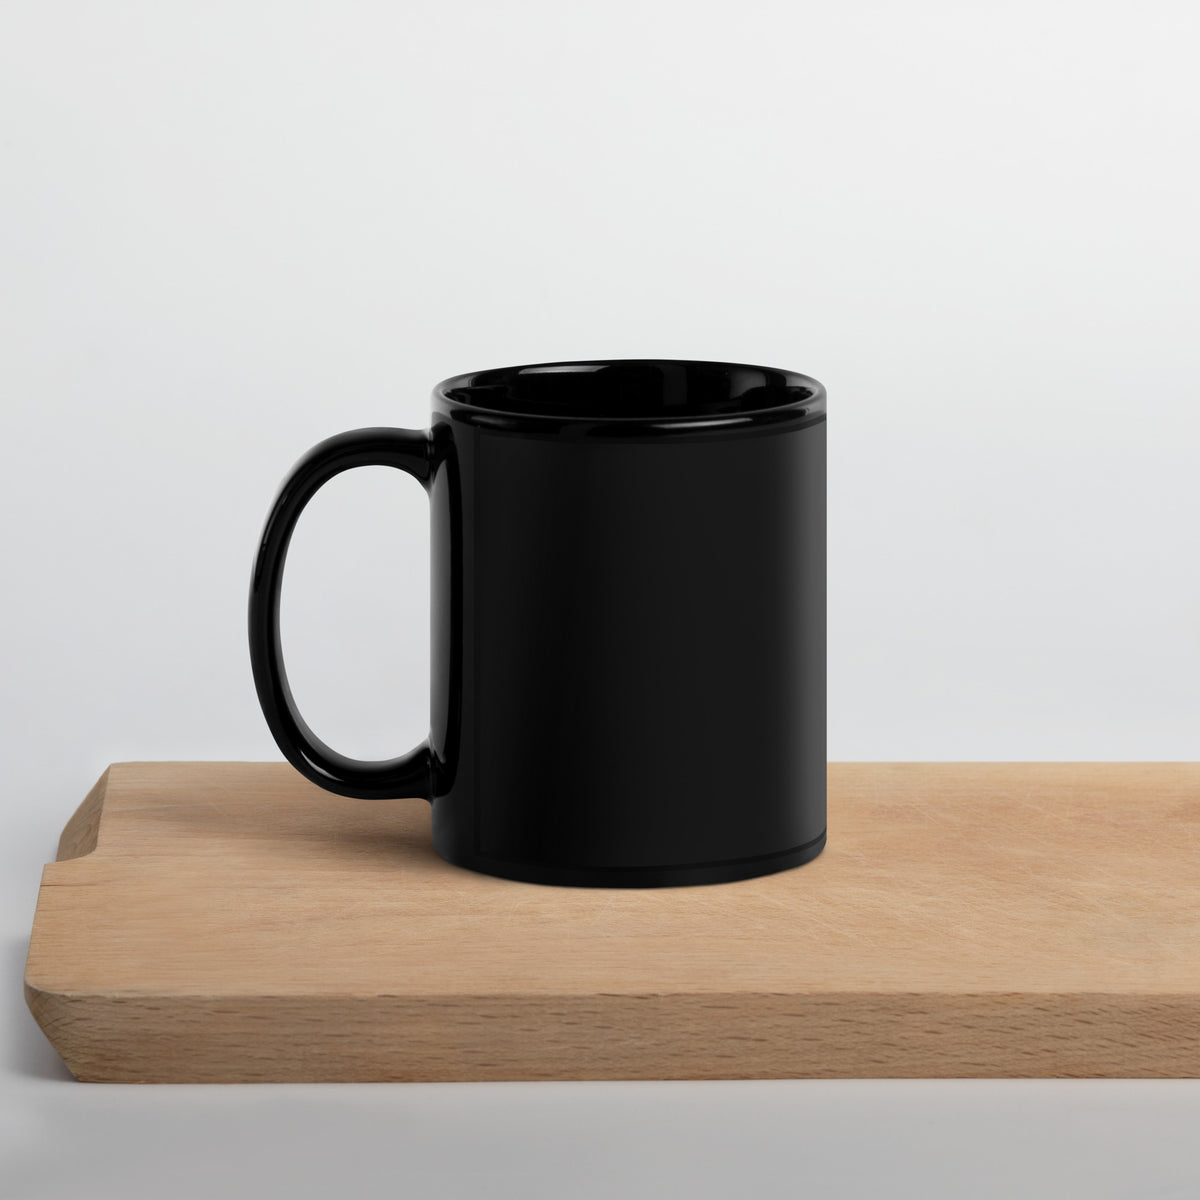 Why We Just Can't Stand Together Upstormed Black Glossy Mug